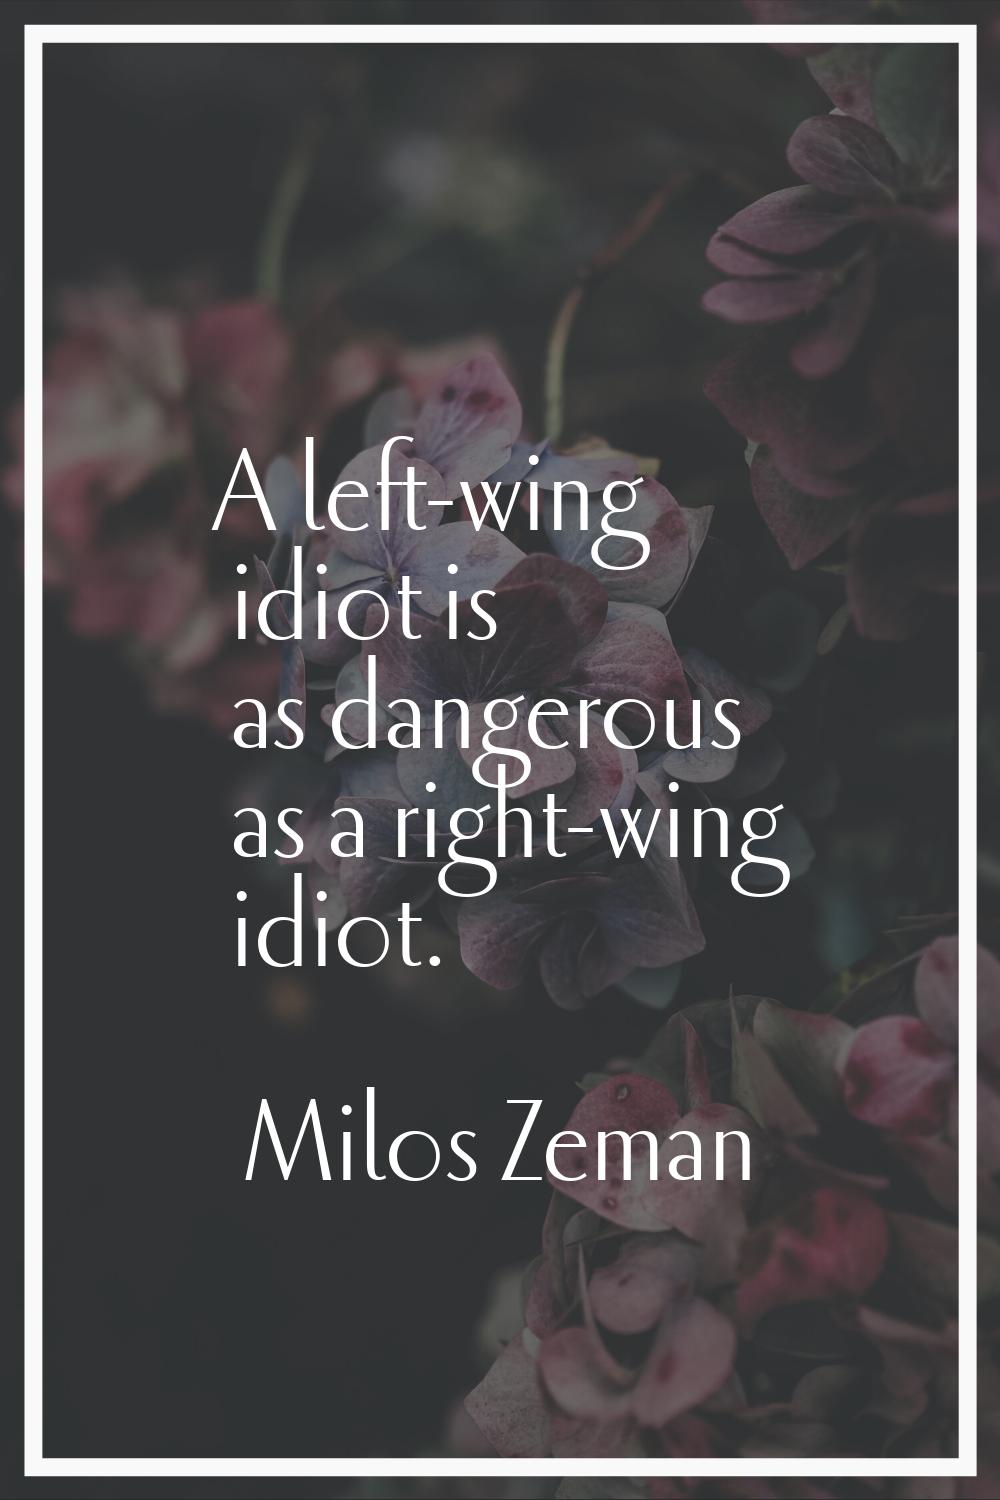 A left-wing idiot is as dangerous as a right-wing idiot.